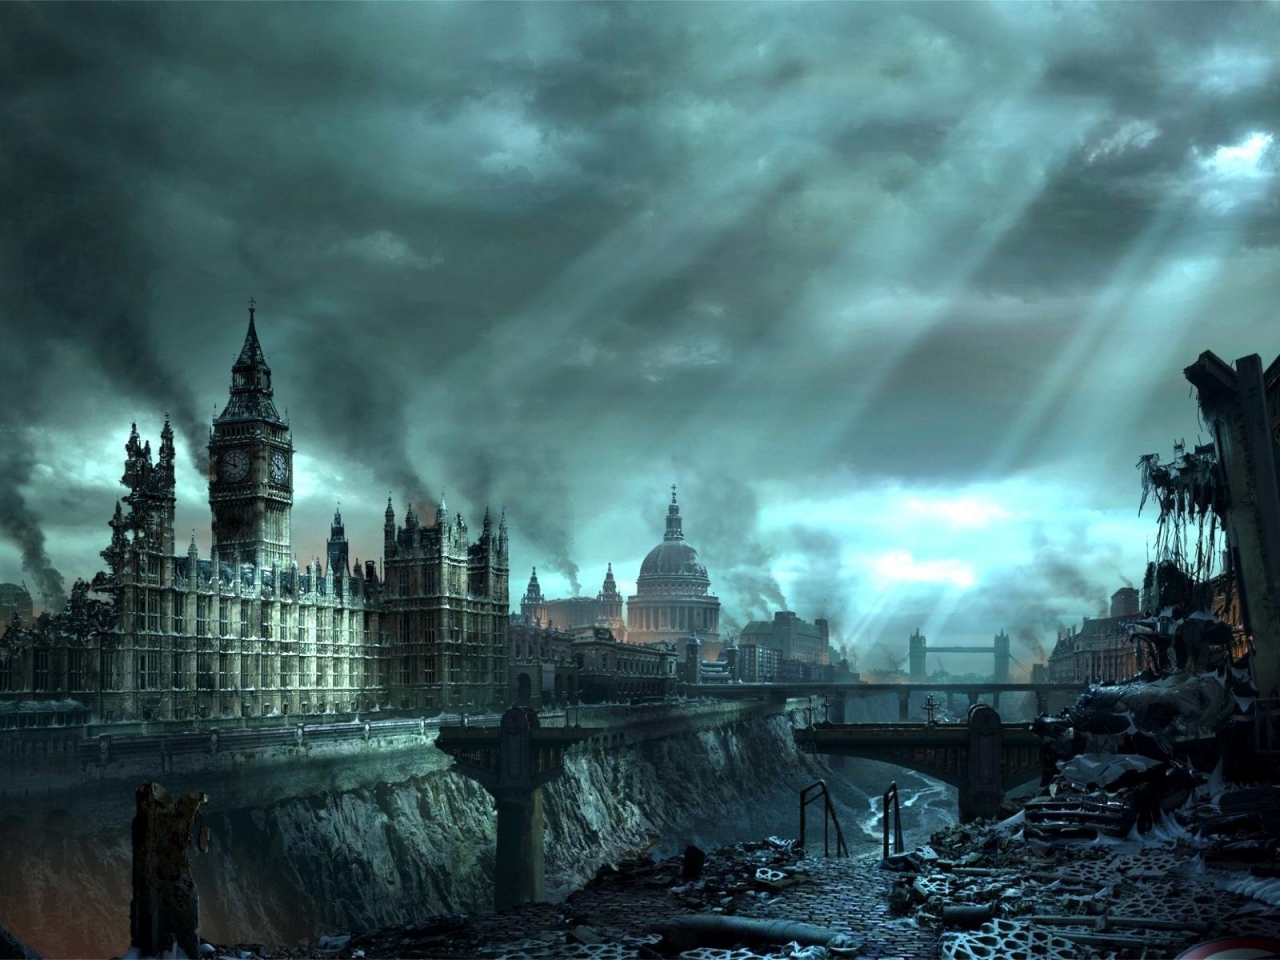 London under disaster for 1280 x 960 resolution